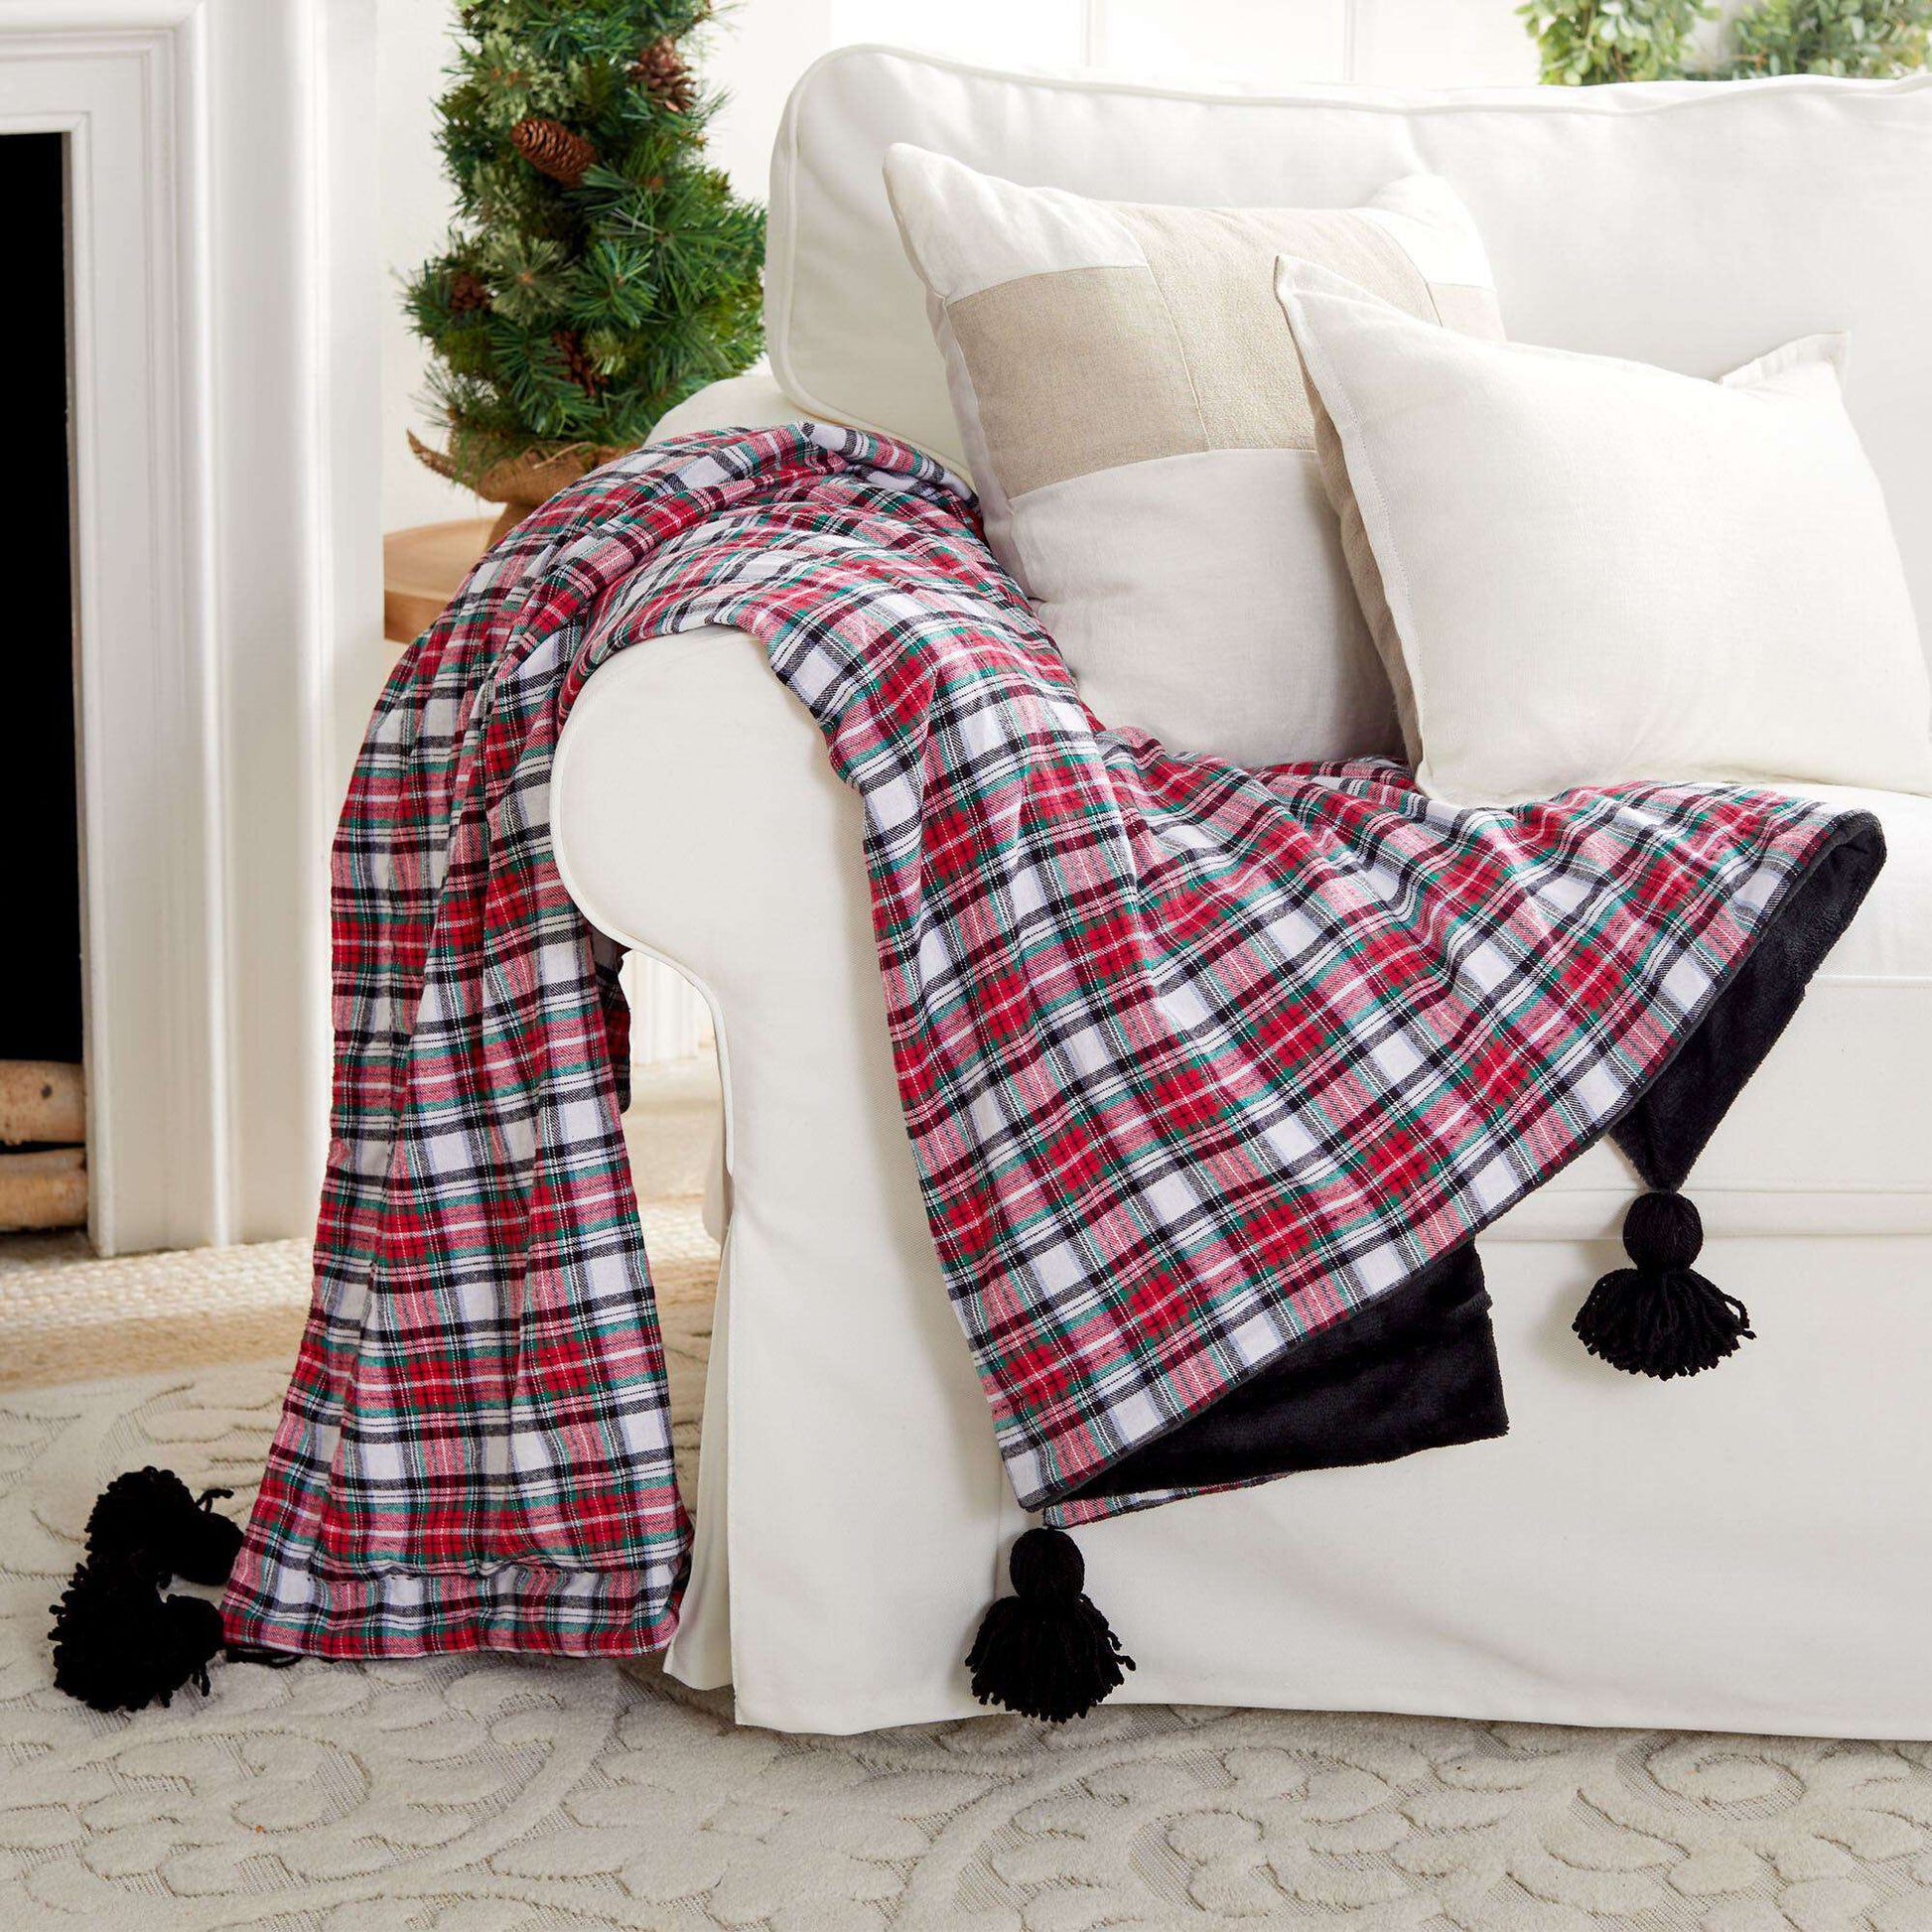 Free Coats & Clark Sewing Cuddle Plaid Throw Pattern